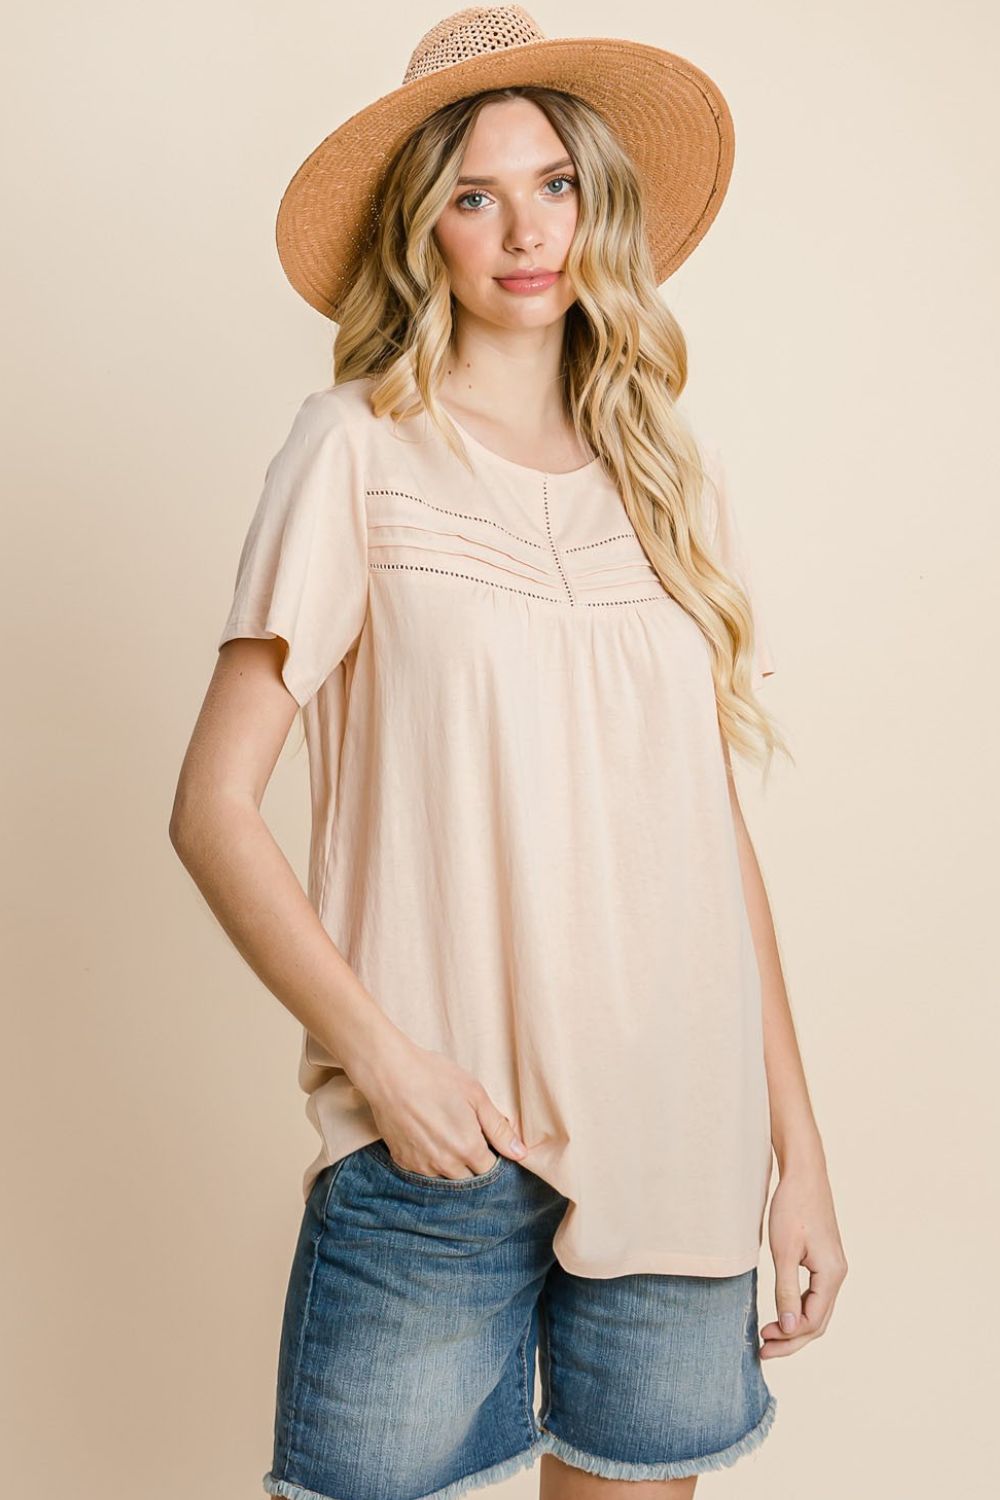 Cotton Bleu Eyelet T-Shirt by Nu Label – Round Neck, Short Sleeve, Feminine Casual Top for Summer & Spring.